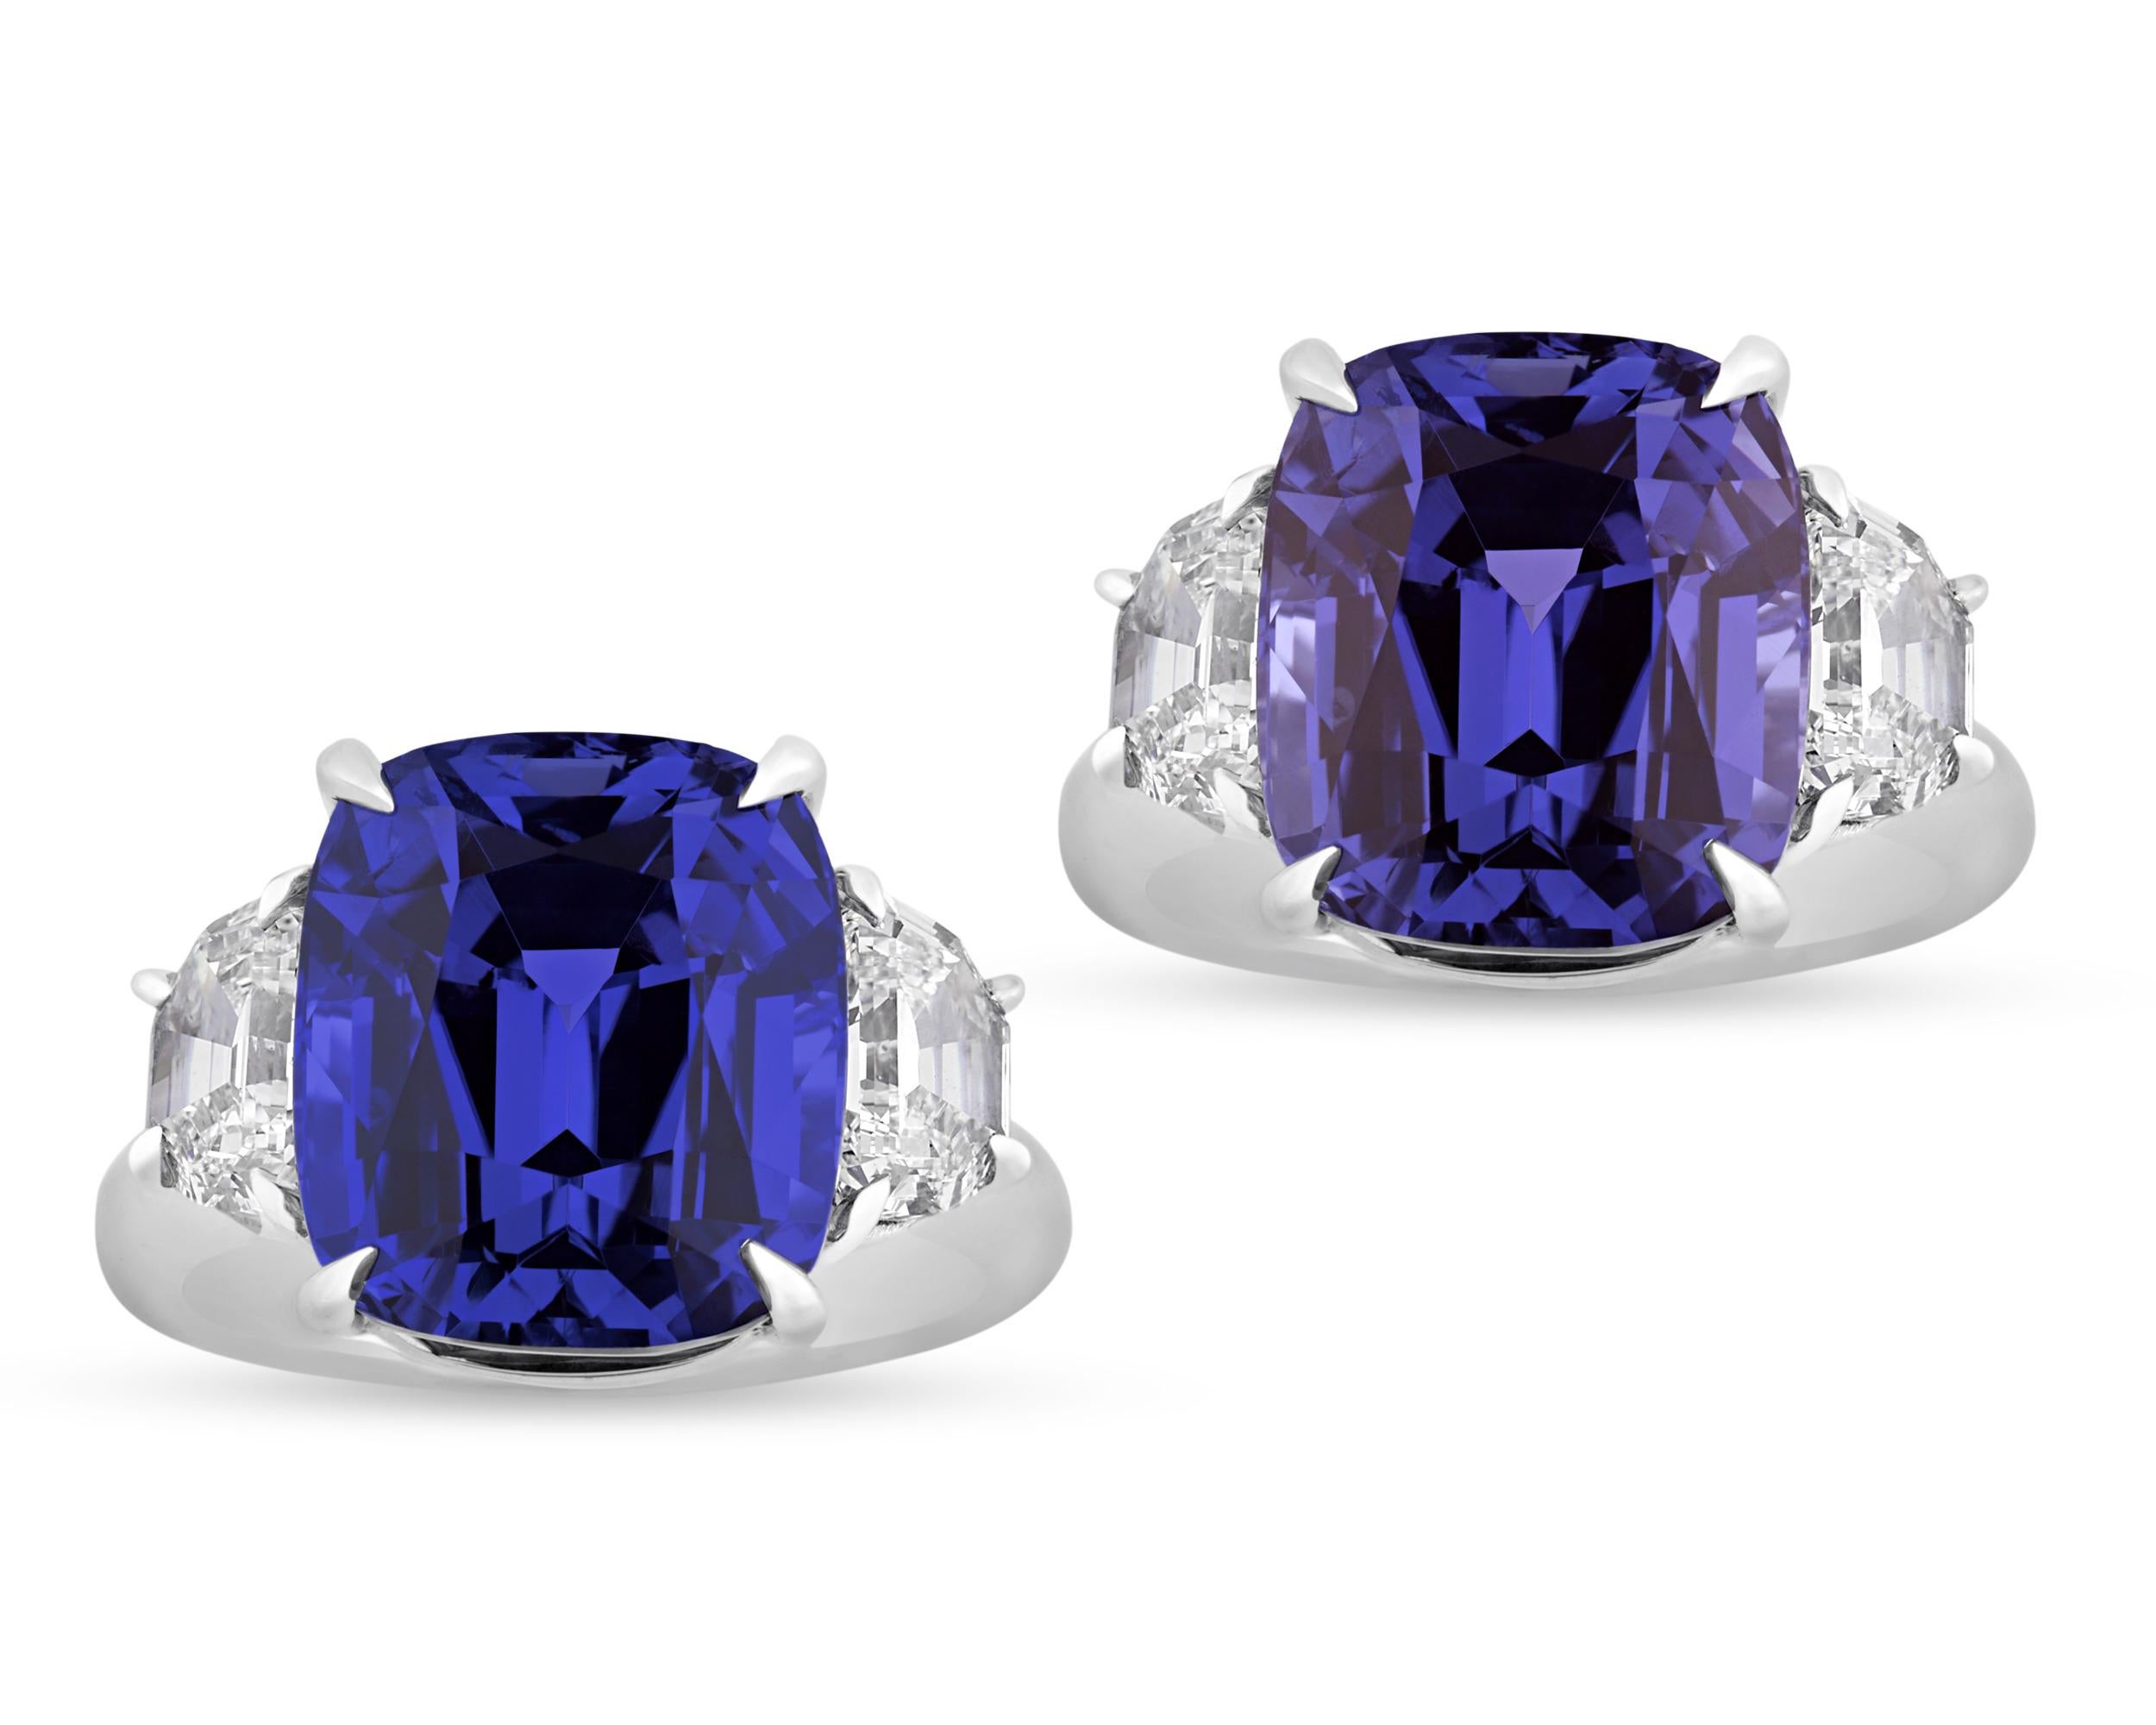 One of the most sought-after colored gemstones in the world, the color-changing sapphire possesses the rare ability to change color depending on the light. Weighing 12.40 carats, this example of the coveted gem is certified as an untreated